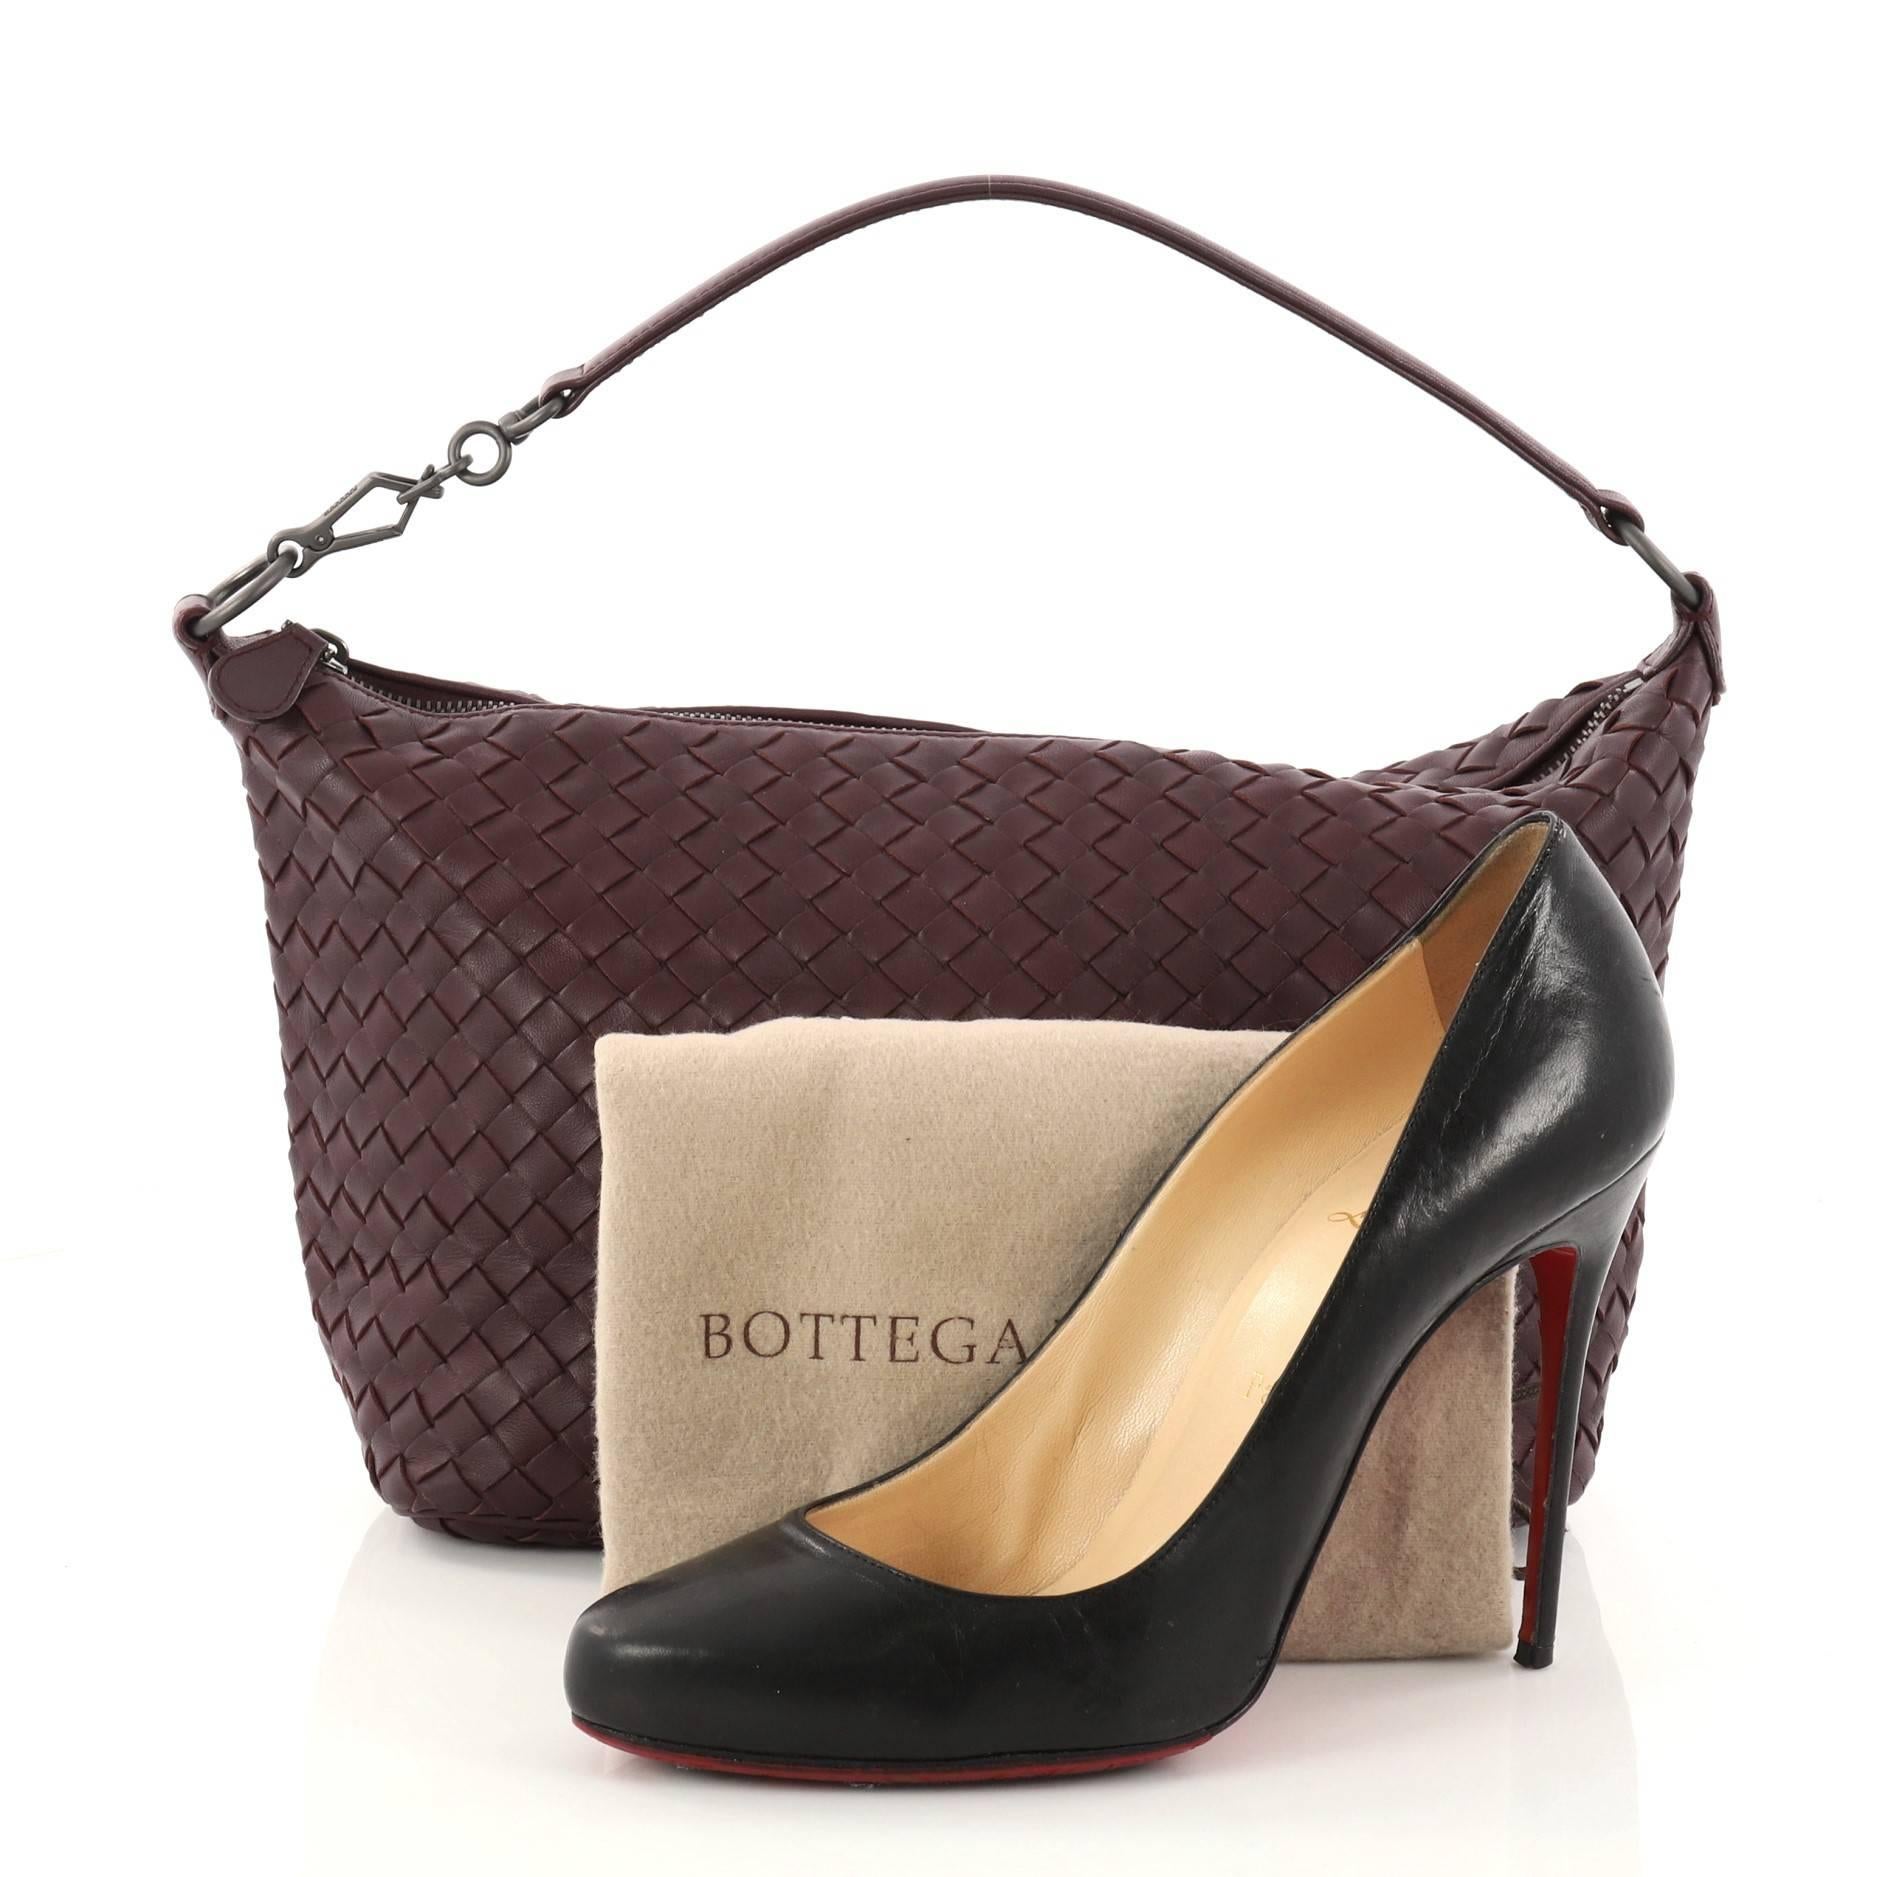 This authentic Bottega Veneta Zip Hobo Intrecciato Nappa Small is a finely crafted bag that exudes an understated elegance. Made from purple nappa leather in Bottega Veneta's signature intrecciato method, this functional and feminine bag features a